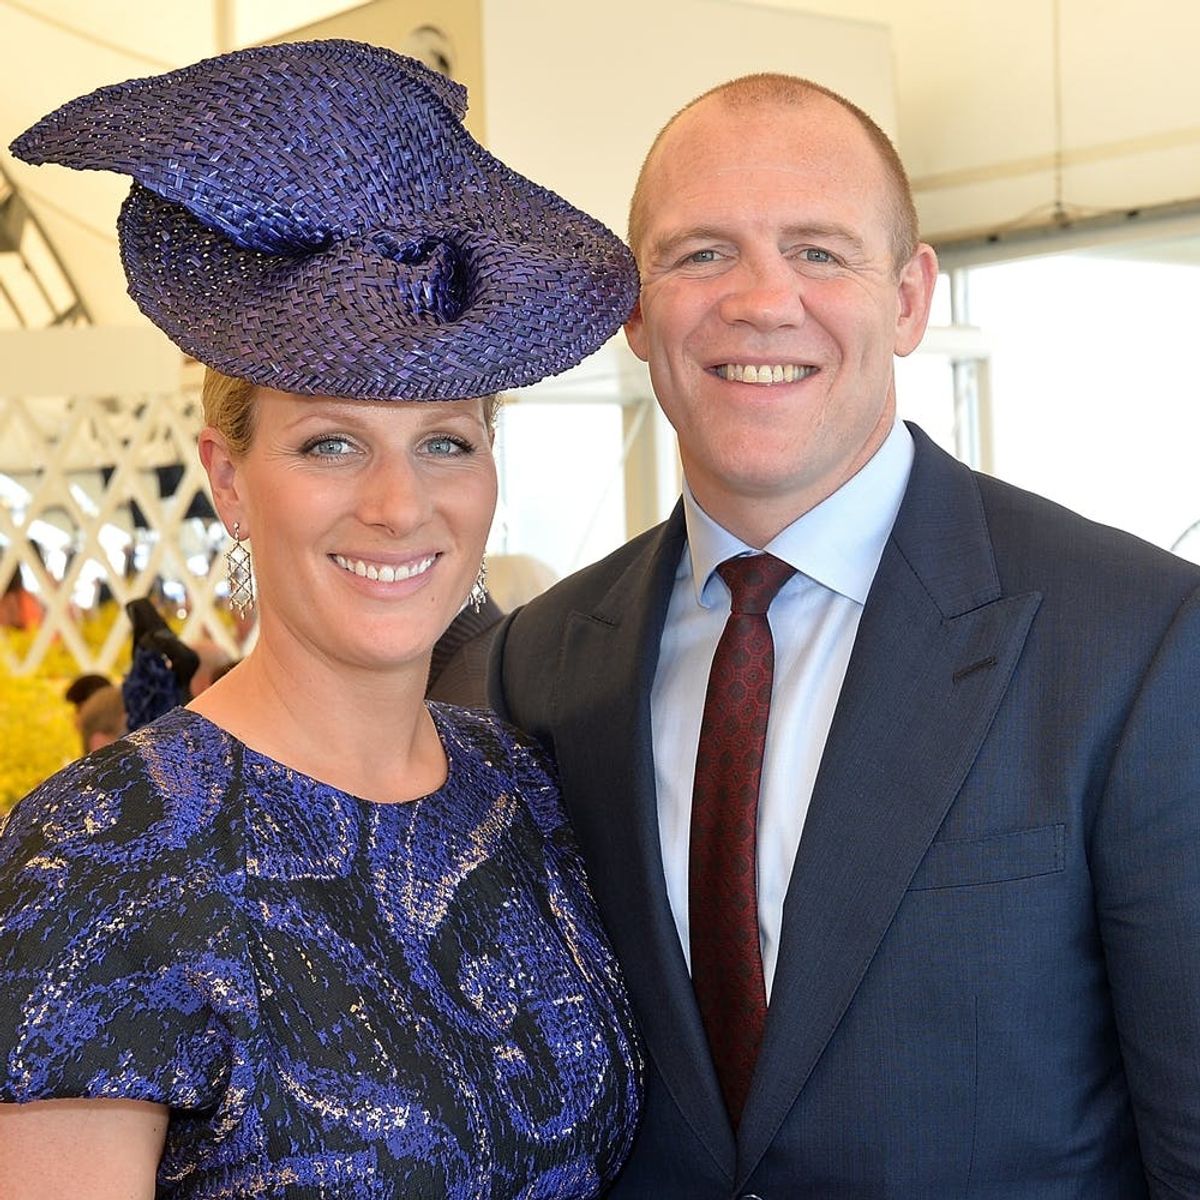 The Queen’s Granddaughter Zara Tindall Is Pregnant With Her Second Child